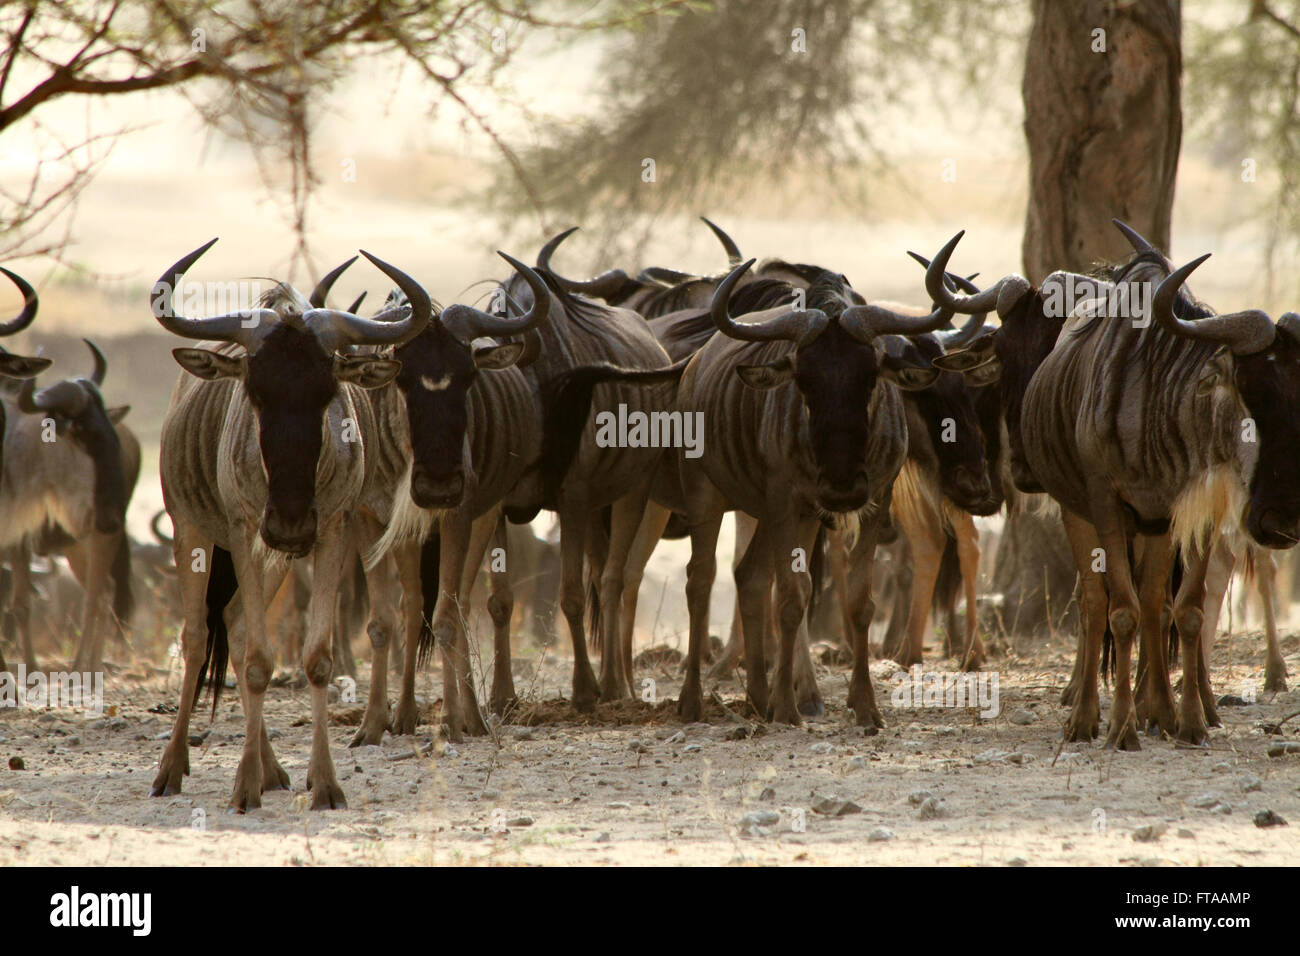 A herd of Wildebeest (Connochaetes taurinus ) stare at the camera Stock Photo